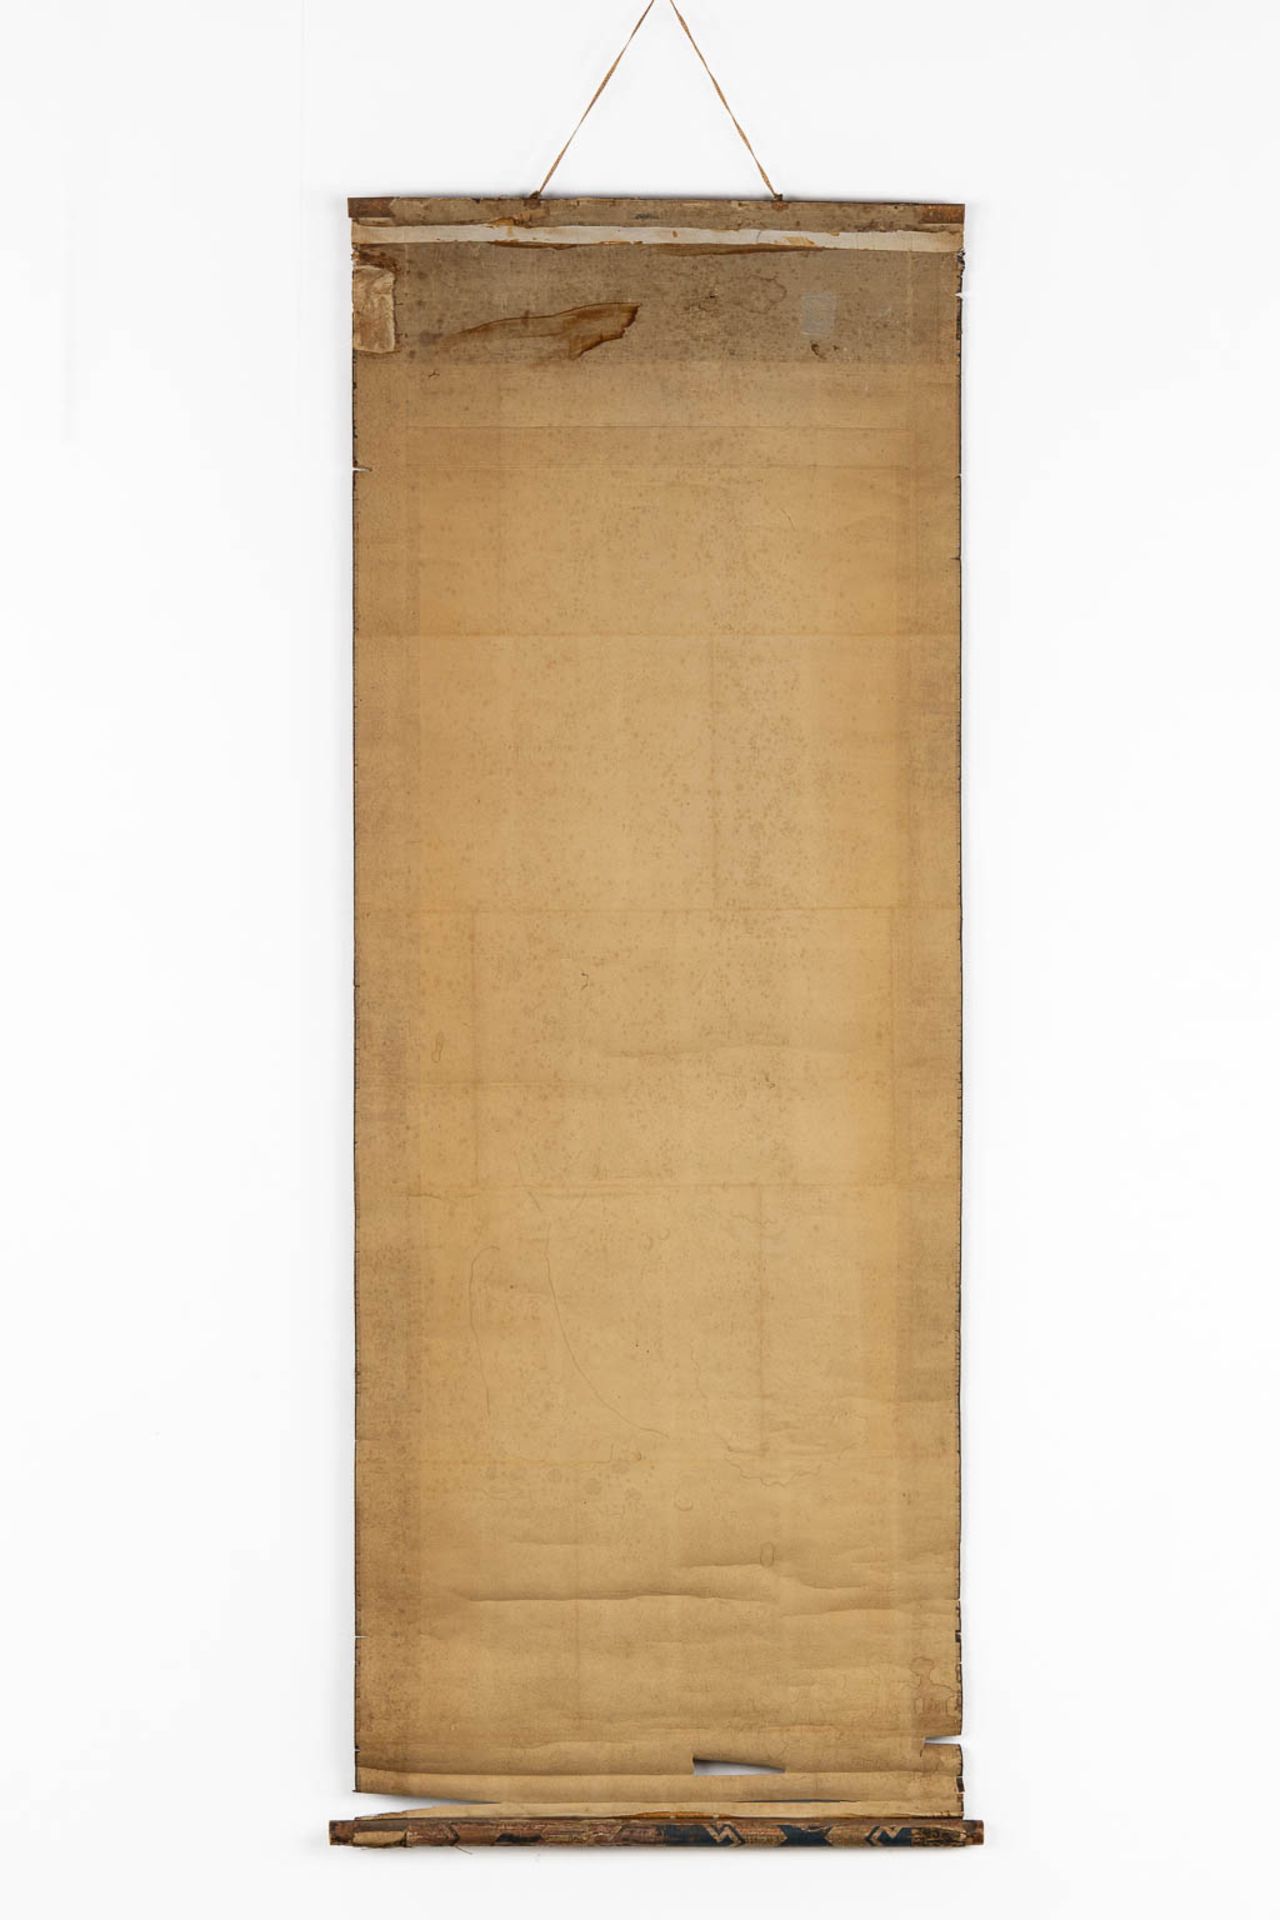 A Chinese scroll, depicting a wise man and his desciple. 19th C. (W:57 x H:180 cm) - Image 9 of 9